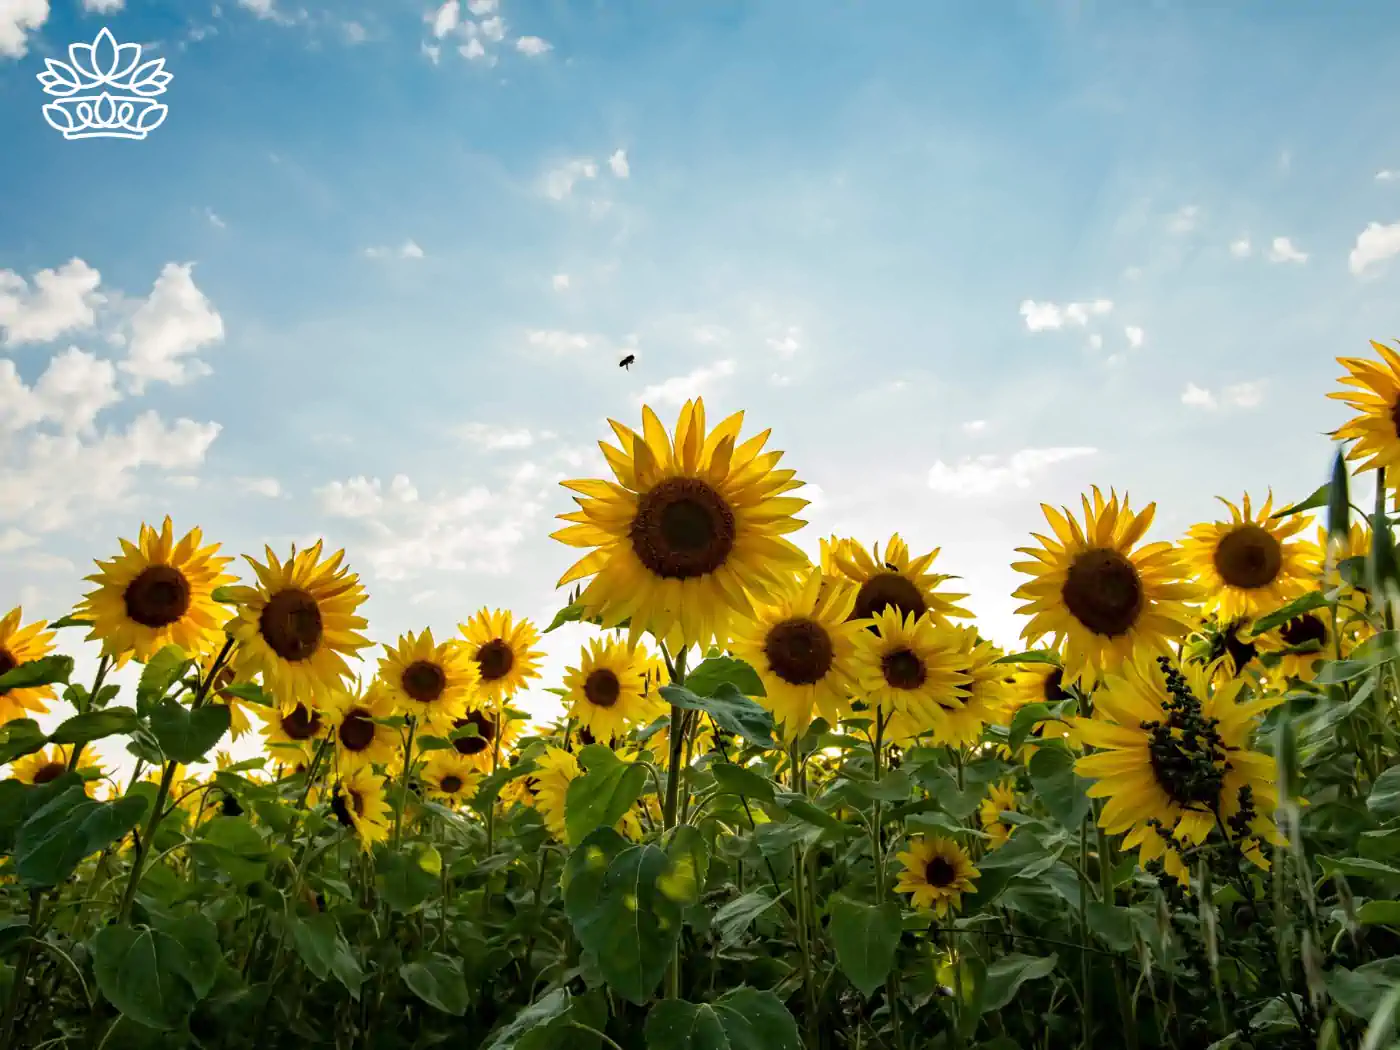 A sunlit field of golden sunflowers reaching towards a blue sky with fluffy clouds, a bee hovering above, symbolising the dynamic harmony of nature. Fabulous Flowers and Gifts: Flower Arrangements Under R500, Delivered with Heart.